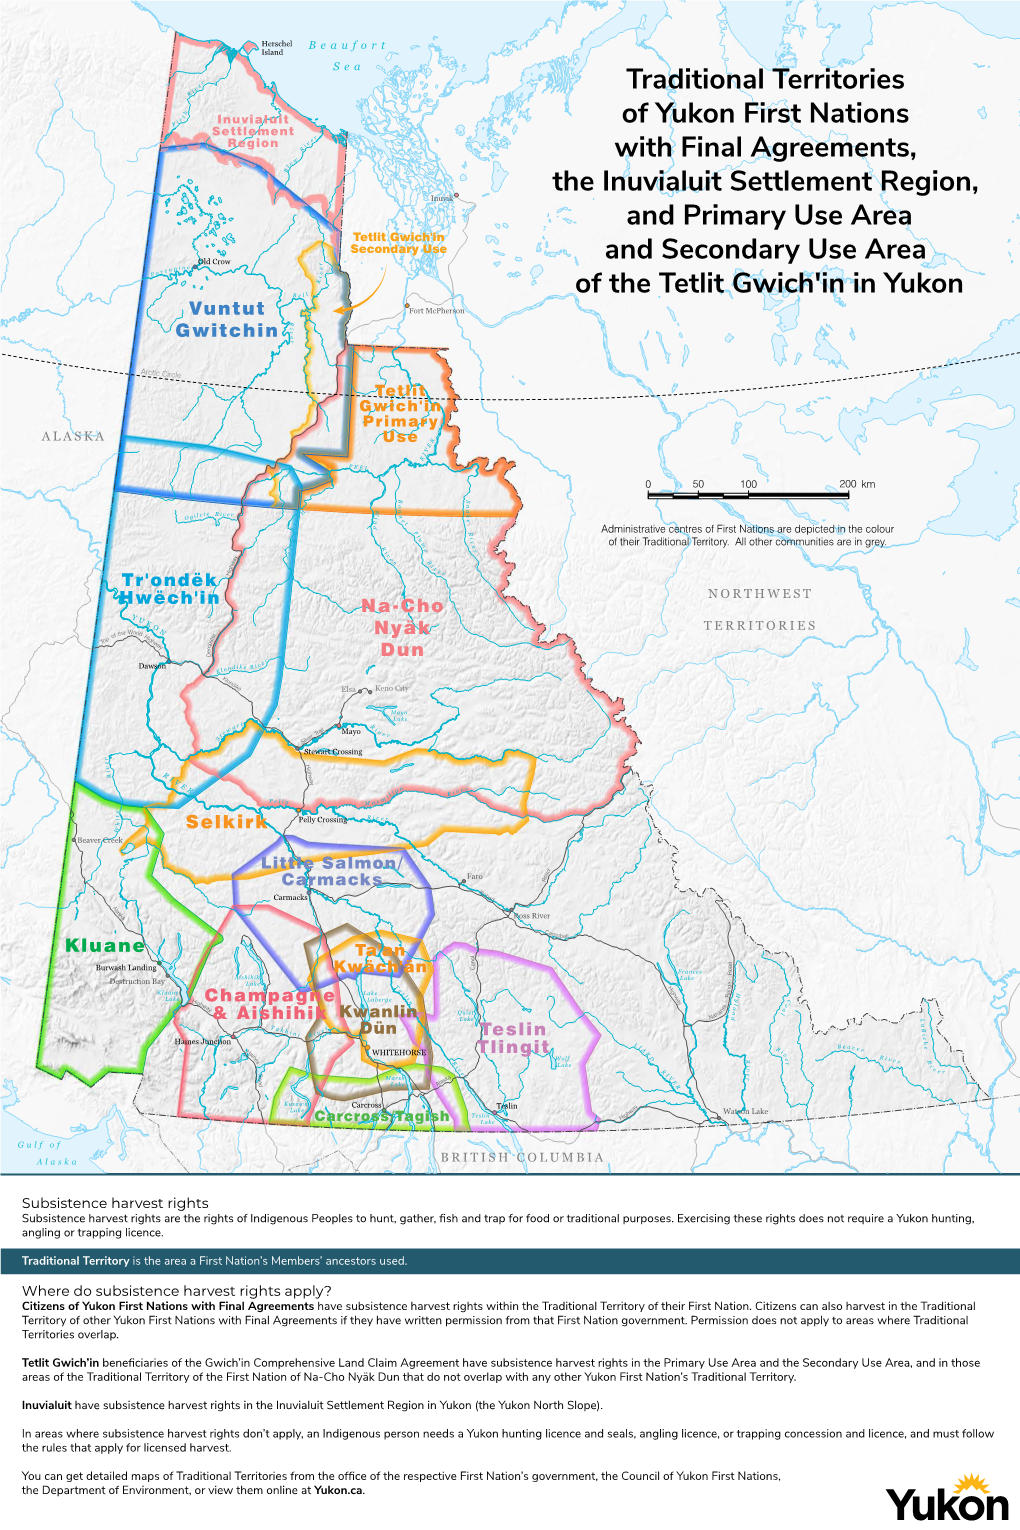 Traditional Territories of Yukon First Nations with Final Agreements, the Inuvialuit Settlement Region, and Primary Use Area